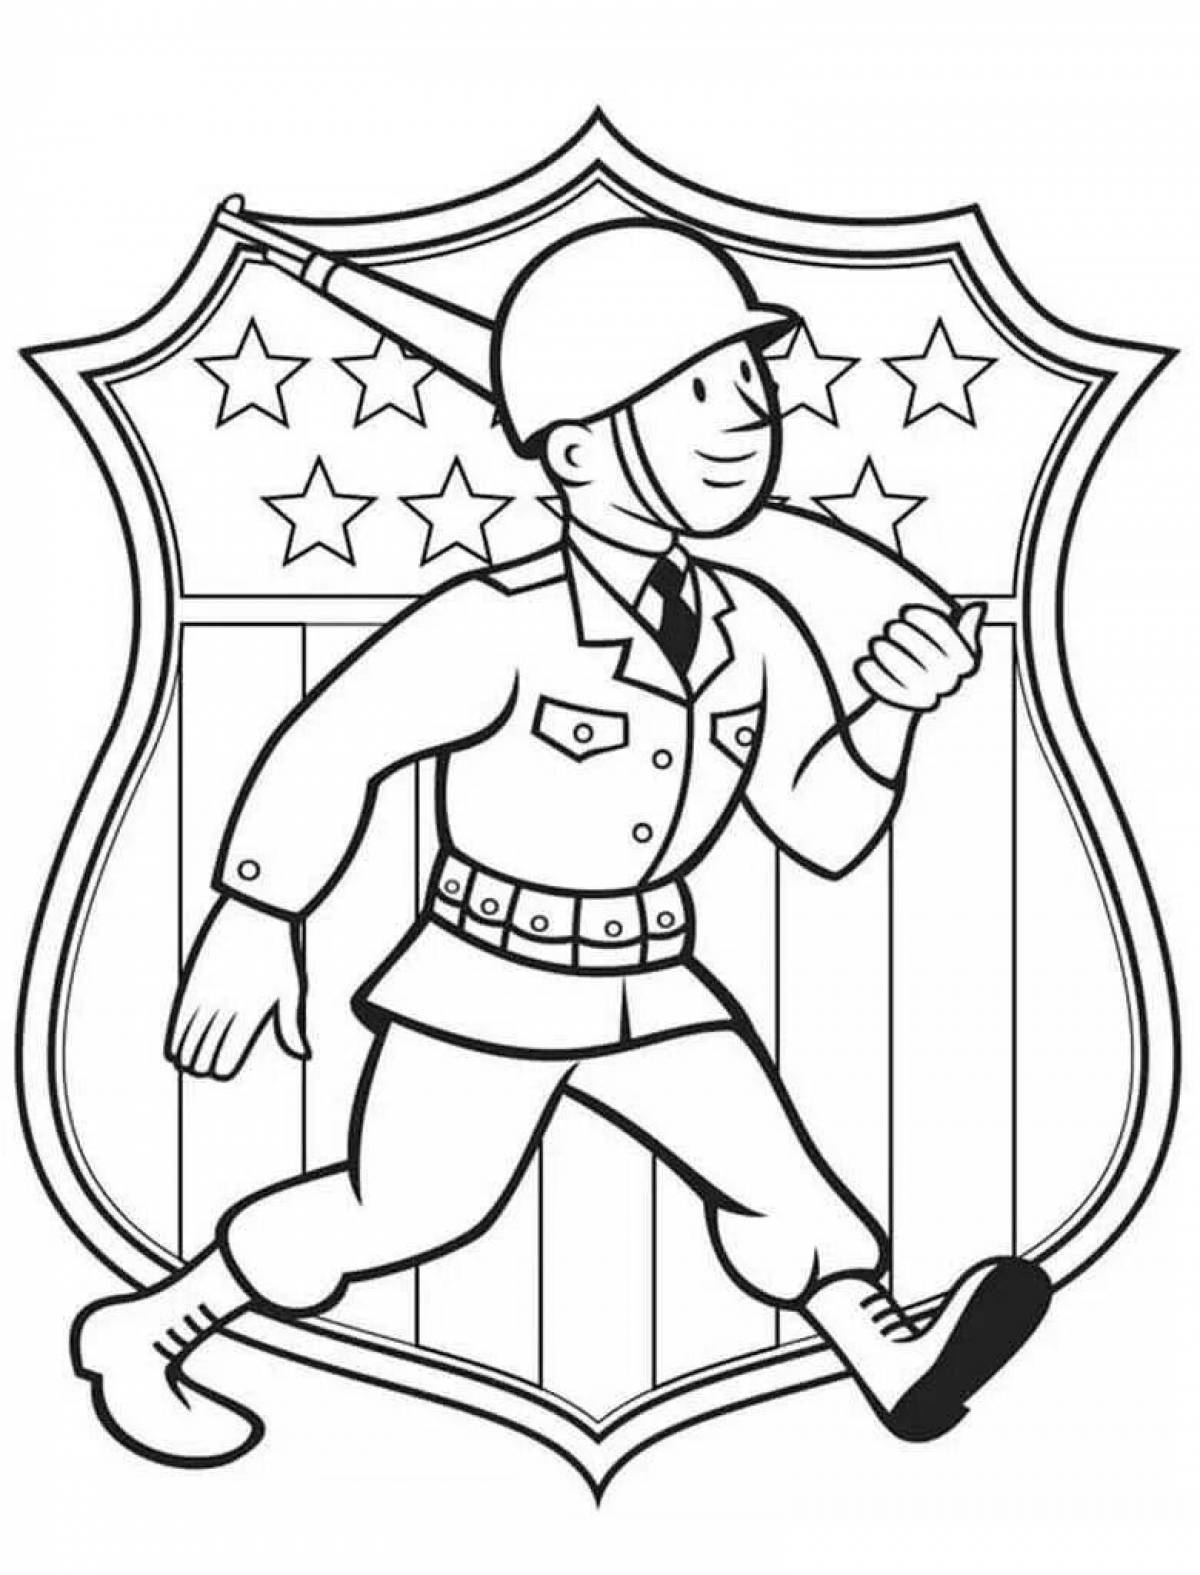 Great coloring pages for boys